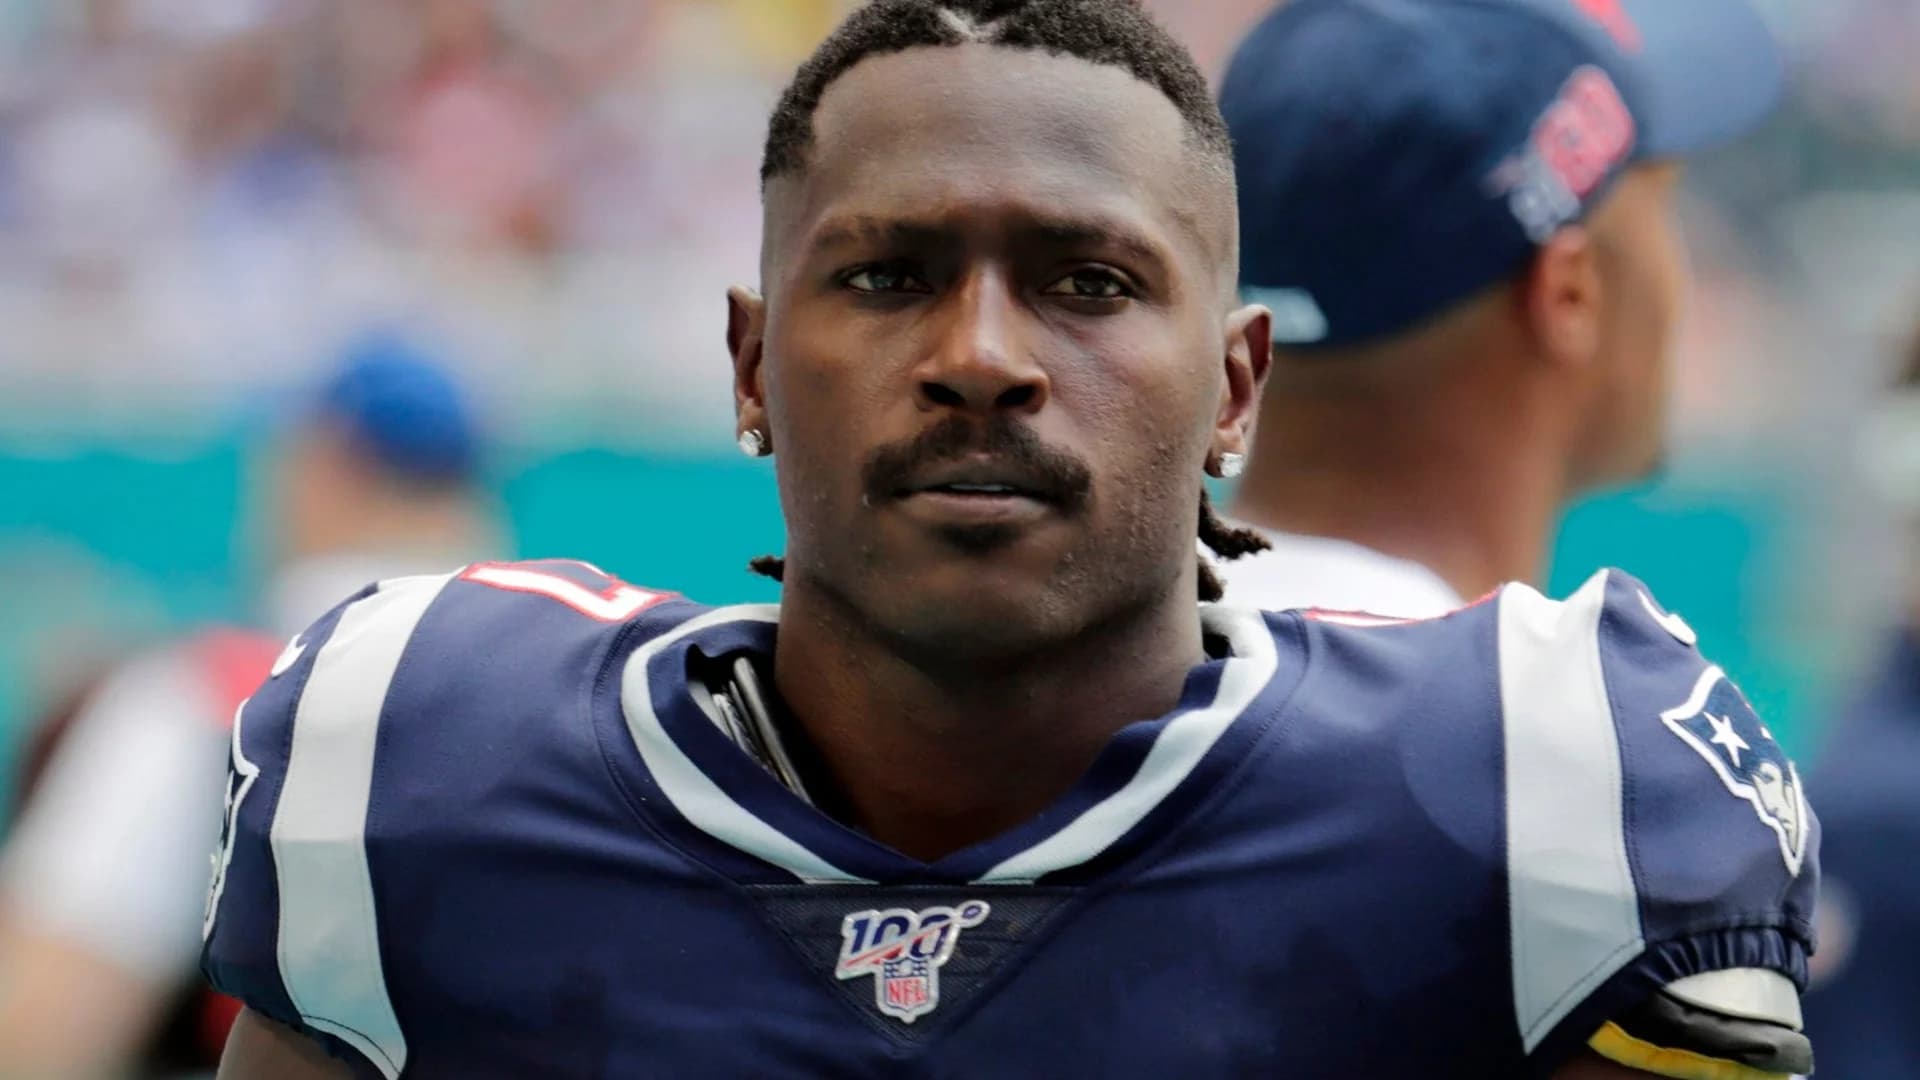 Patriots release Antonio Brown after another accusation